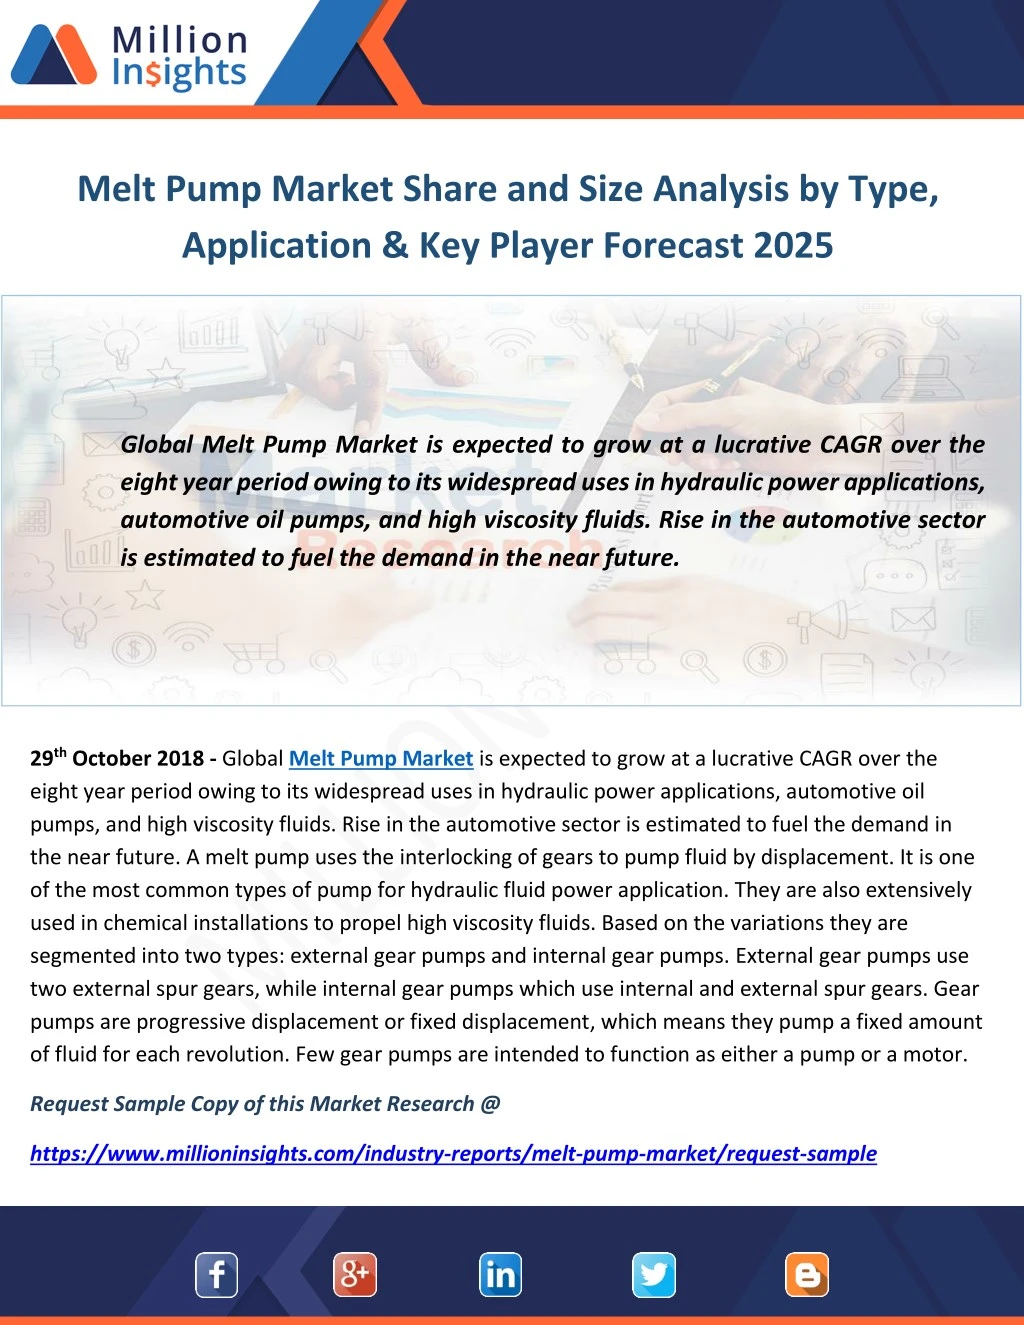 melt pump market share and size analysis by type